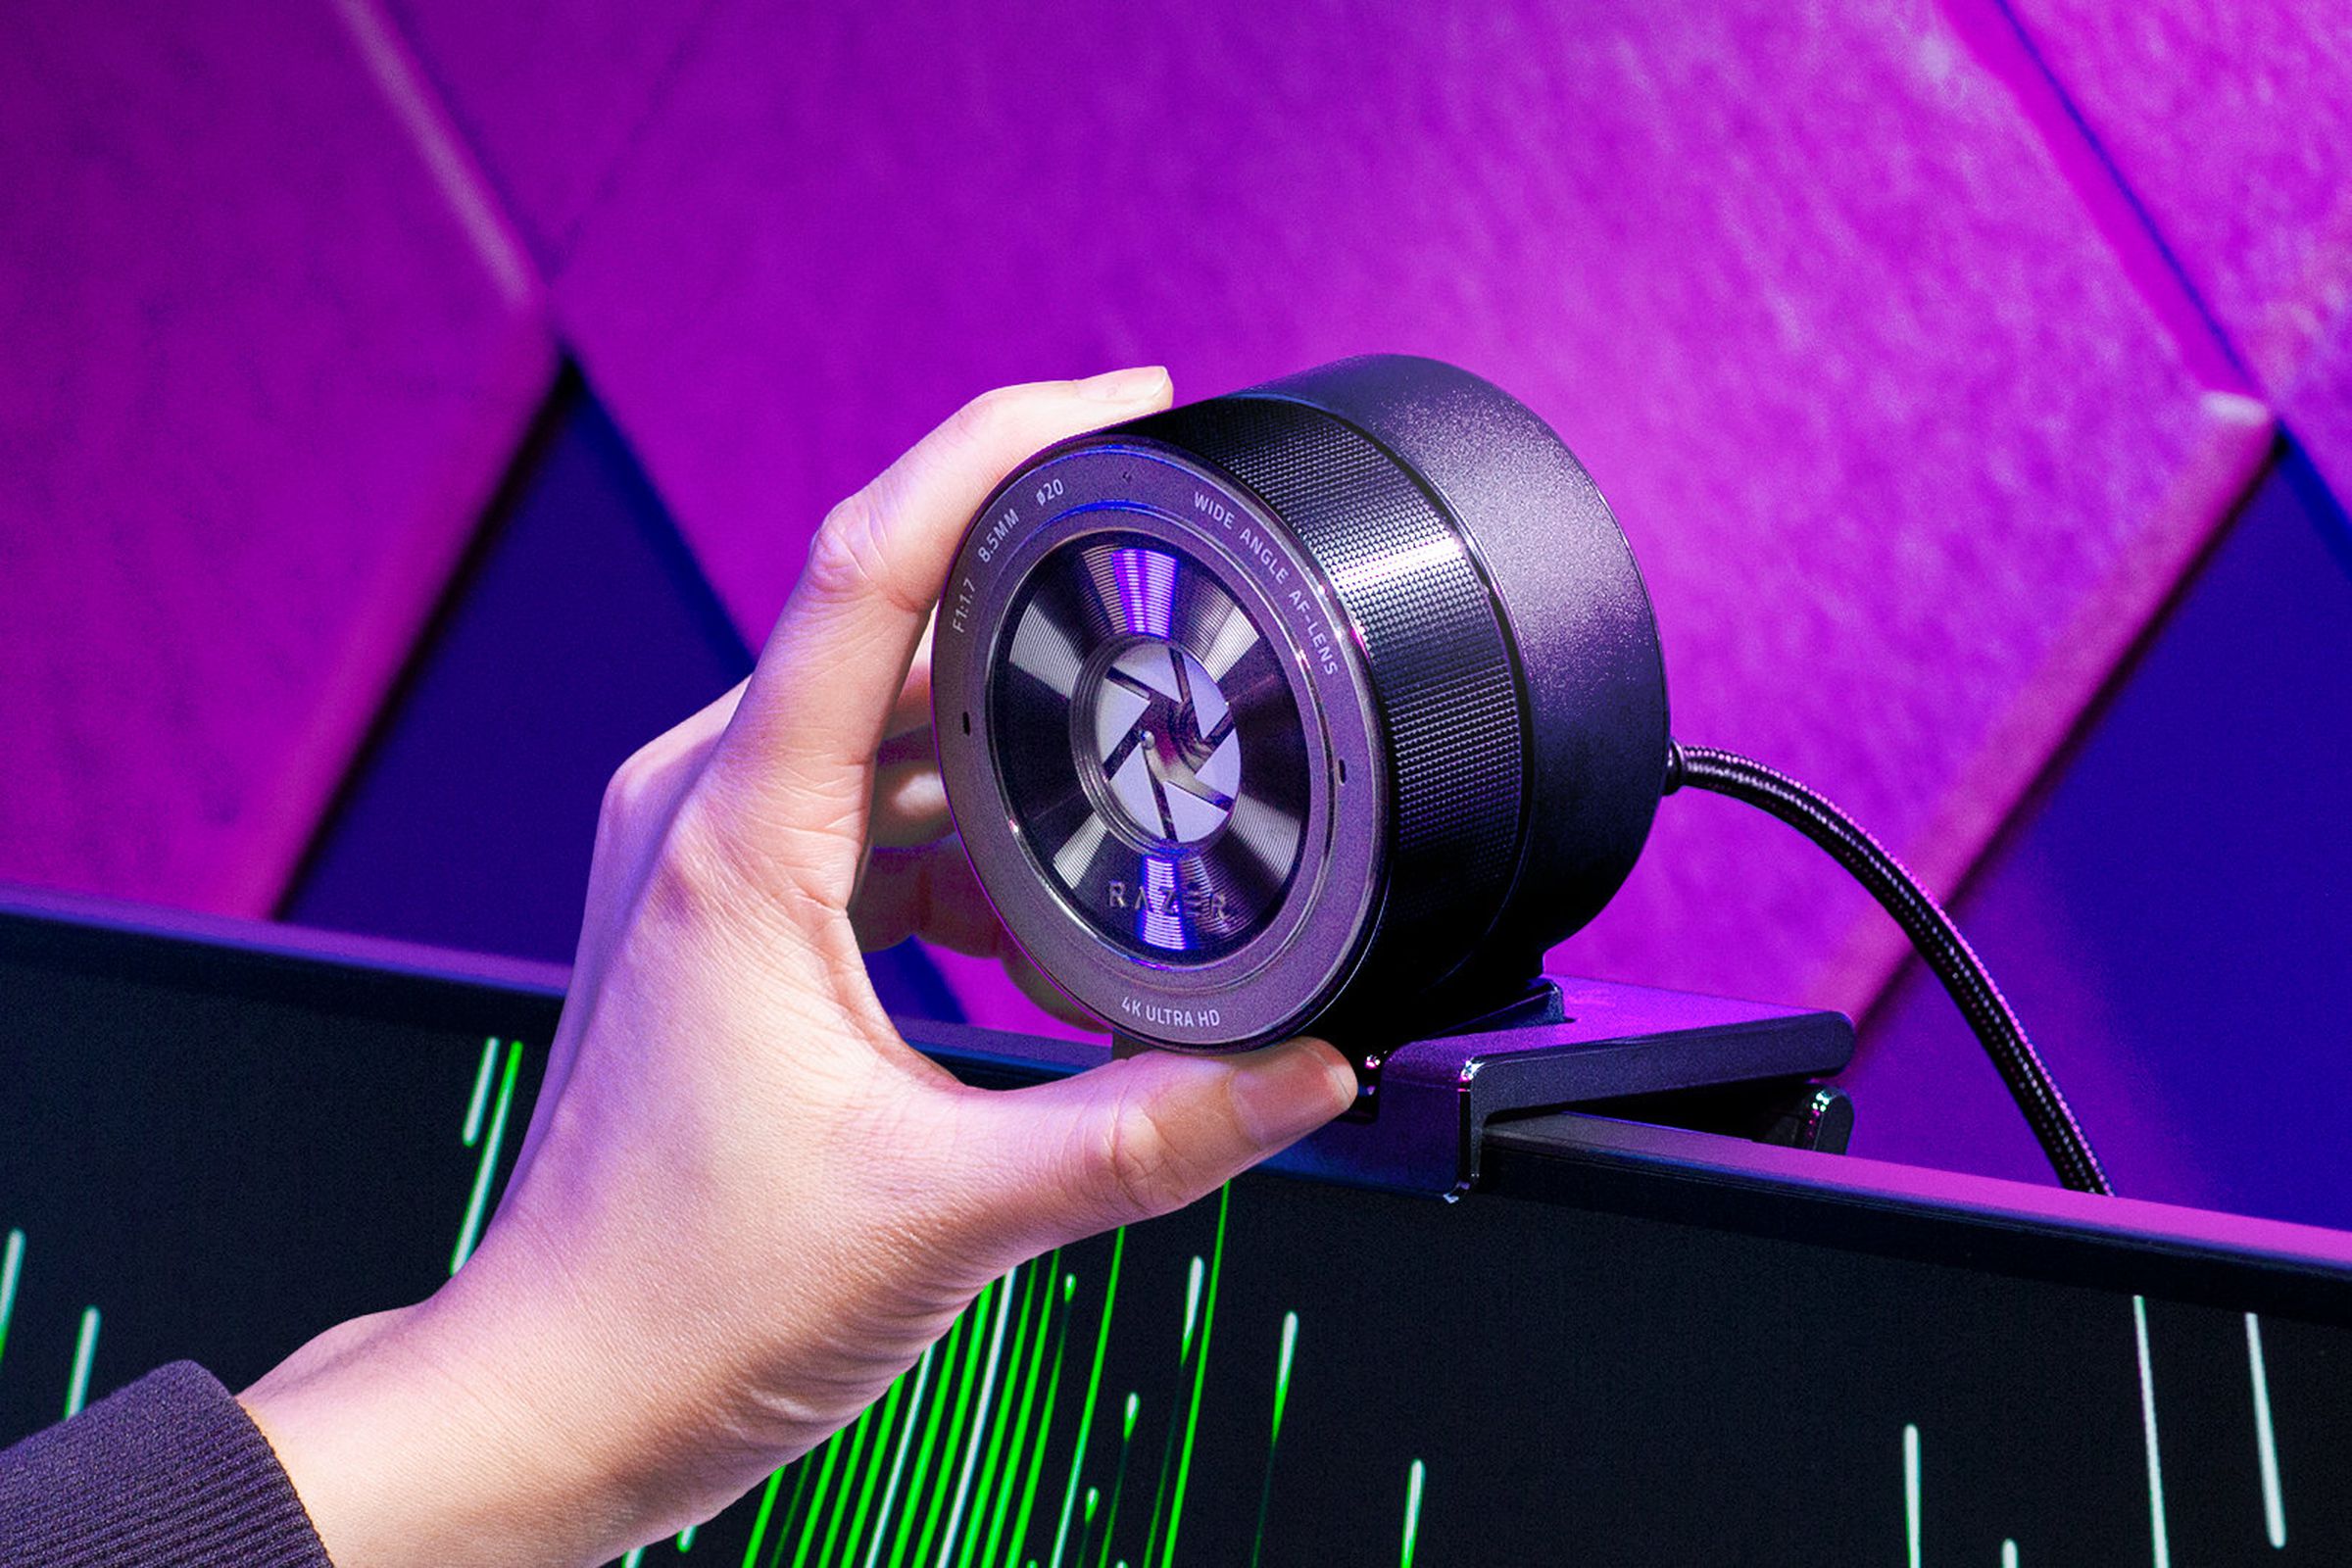 Razer’s Kiyo Pro Ultra webcam being twisted to close its shutter for privacy.